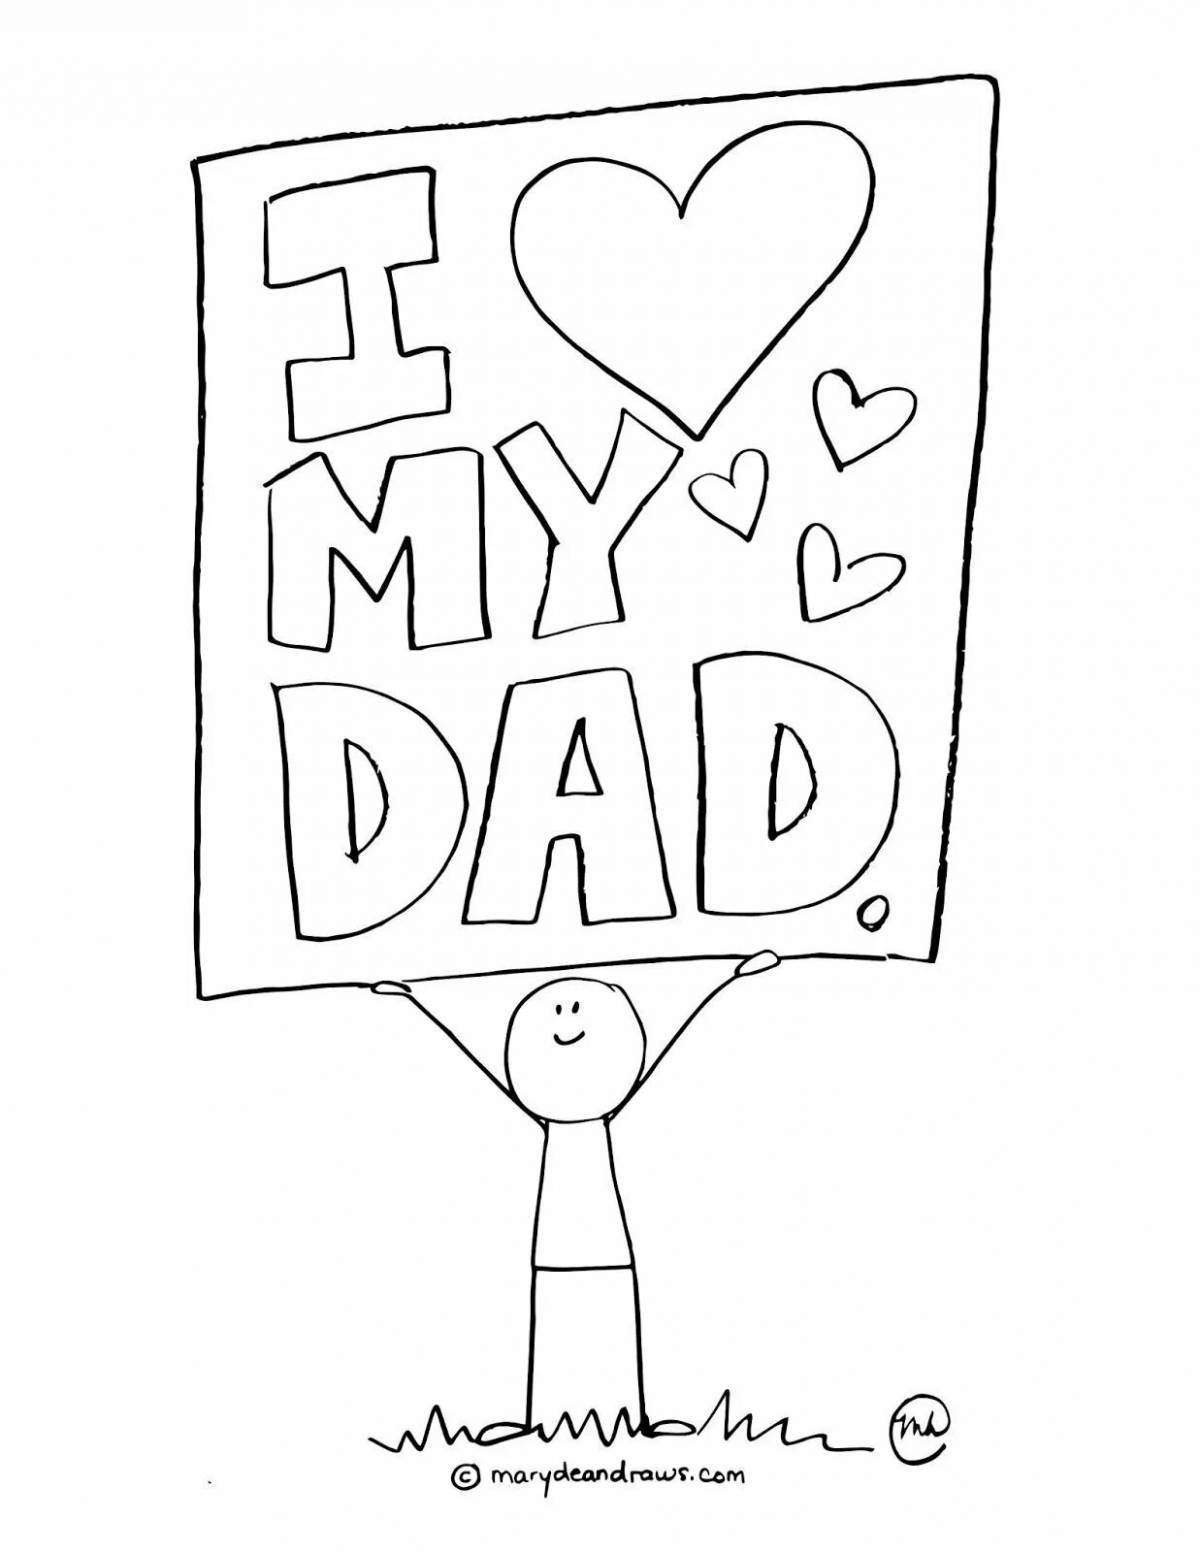 Heartfelt coloring book dad's birthday from daughter